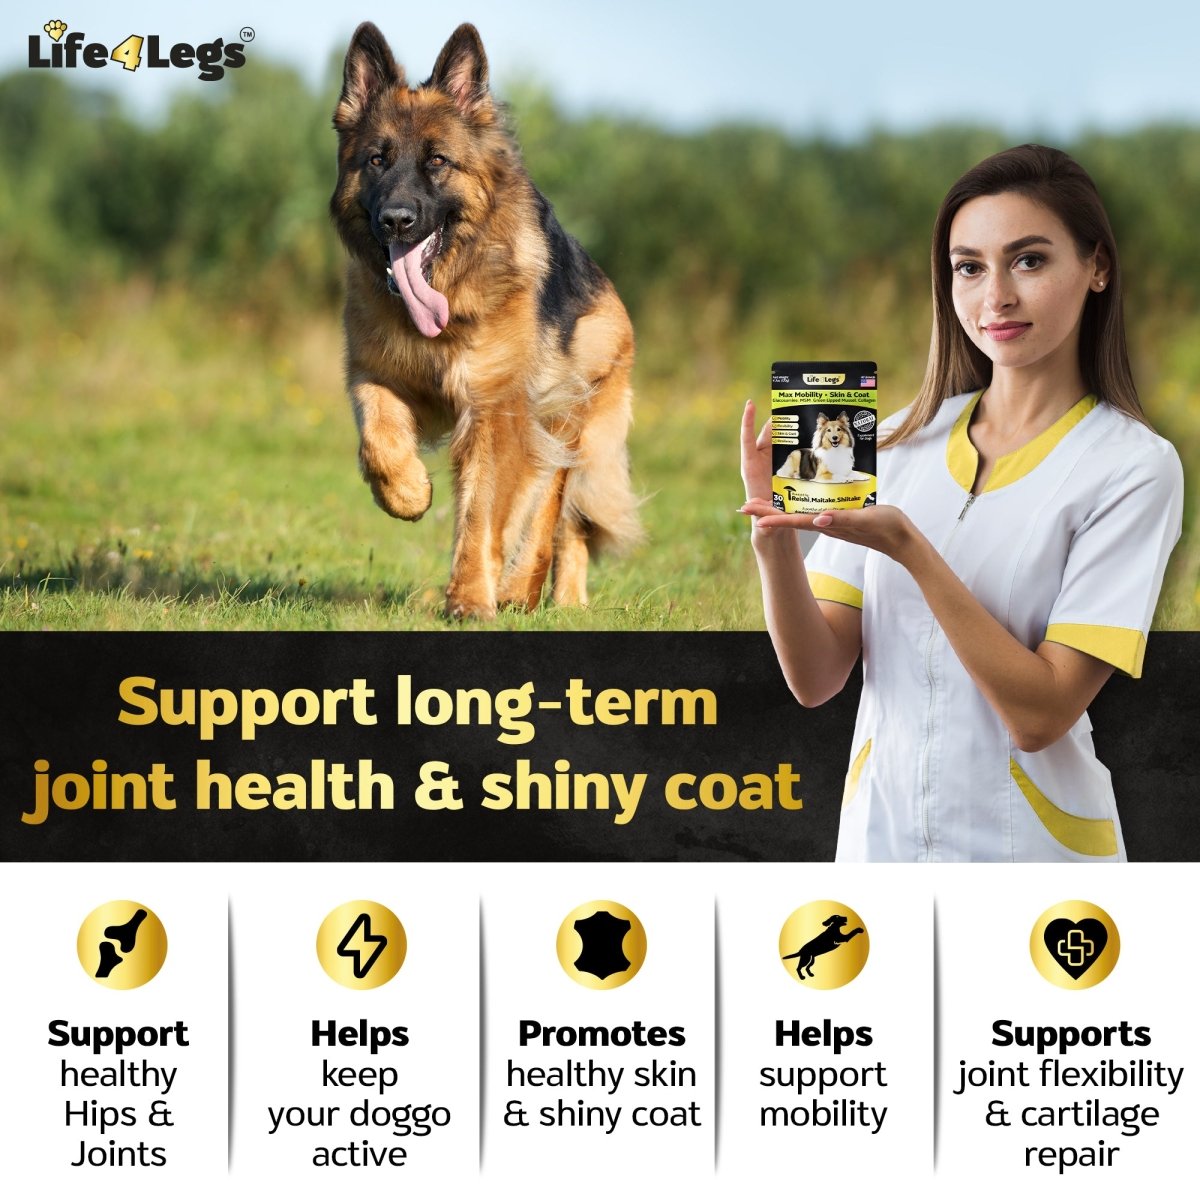 30 Hip and Joint Chews for Dogs + Skin and Coat Supplement - Glucosamine, Chondroitin, Omega 3 for Dogs,  Mobility Dog Health Supplies